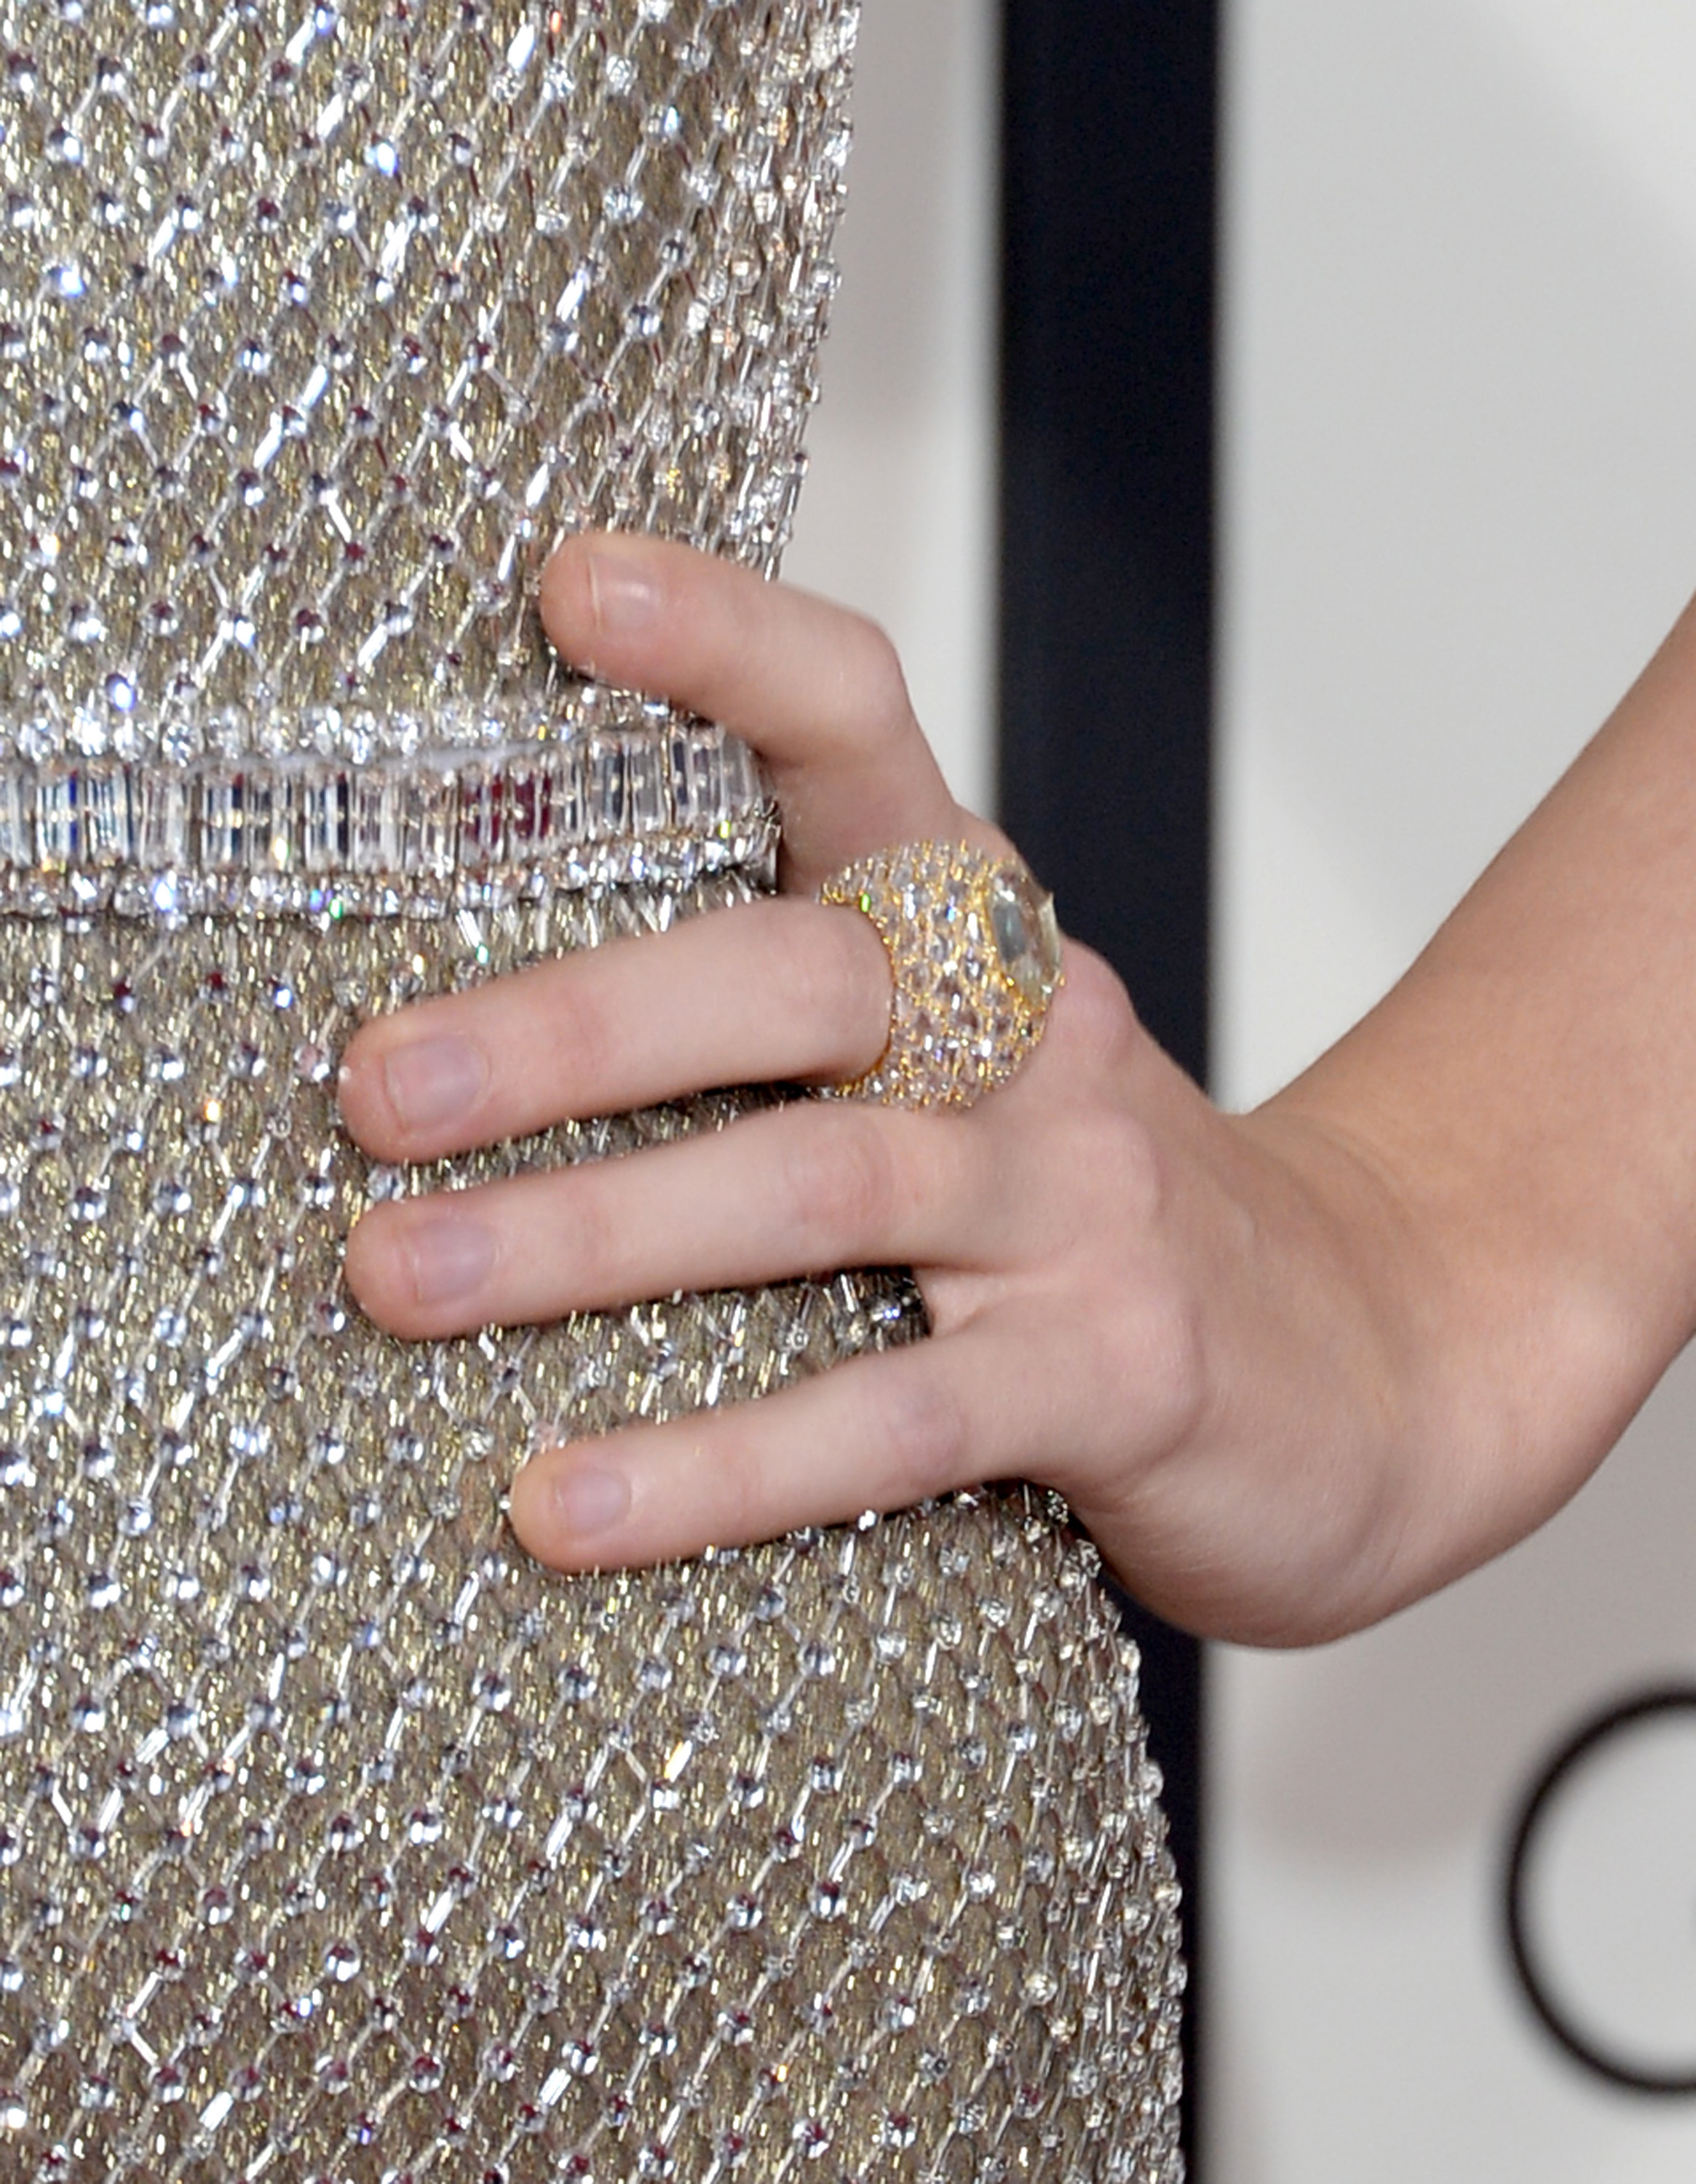 Grammy Awards Well Played Weekend, Taylor Swift Taylor Swift's ring ...